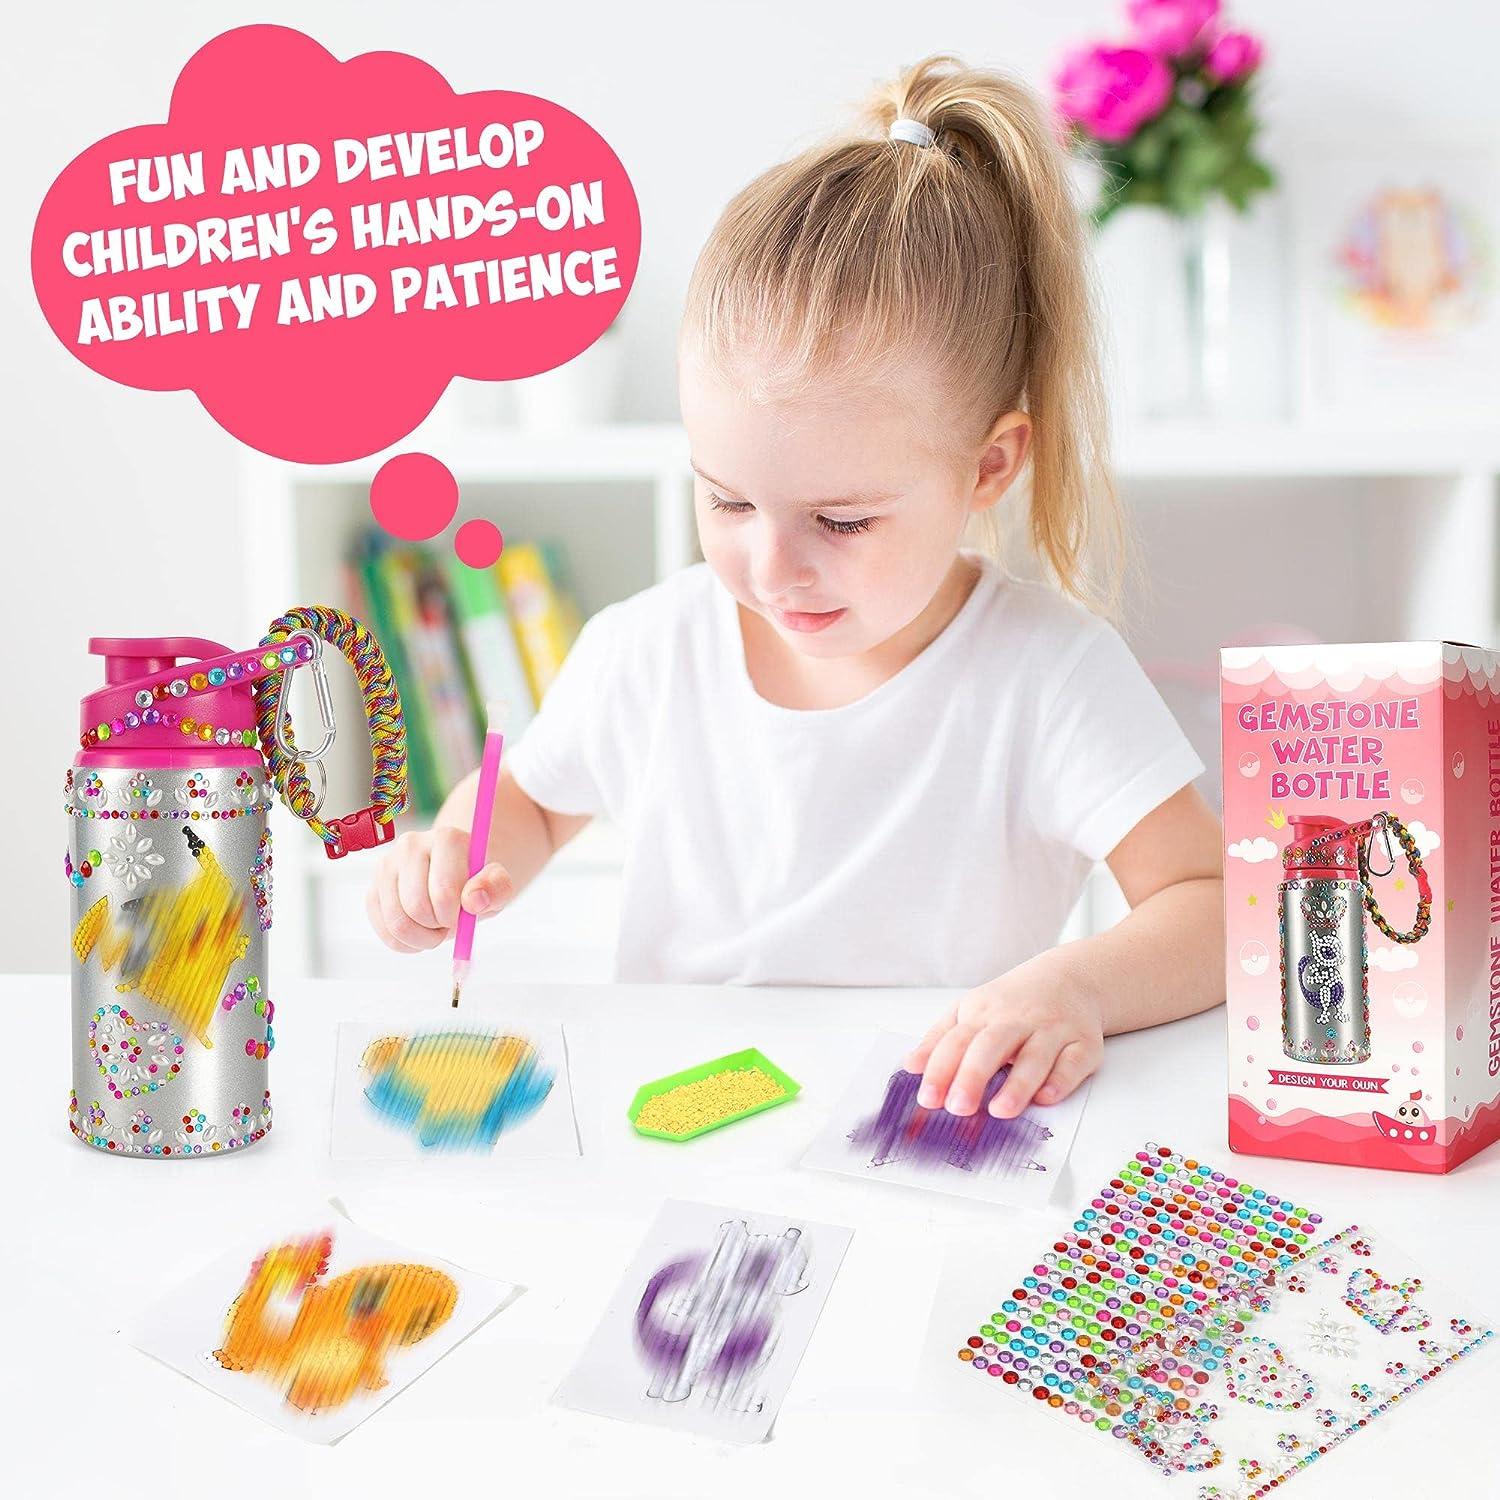  kalastigo Decorate Your Own Water Bottle Kits for Girls Age 4 5  6 7 8 9 10 11 12,Unicorn Gem Diamond Painting Crafts Stickers,Fun Arts and  Crafts Gifts for Girls Birthday Christmas : Toys & Games